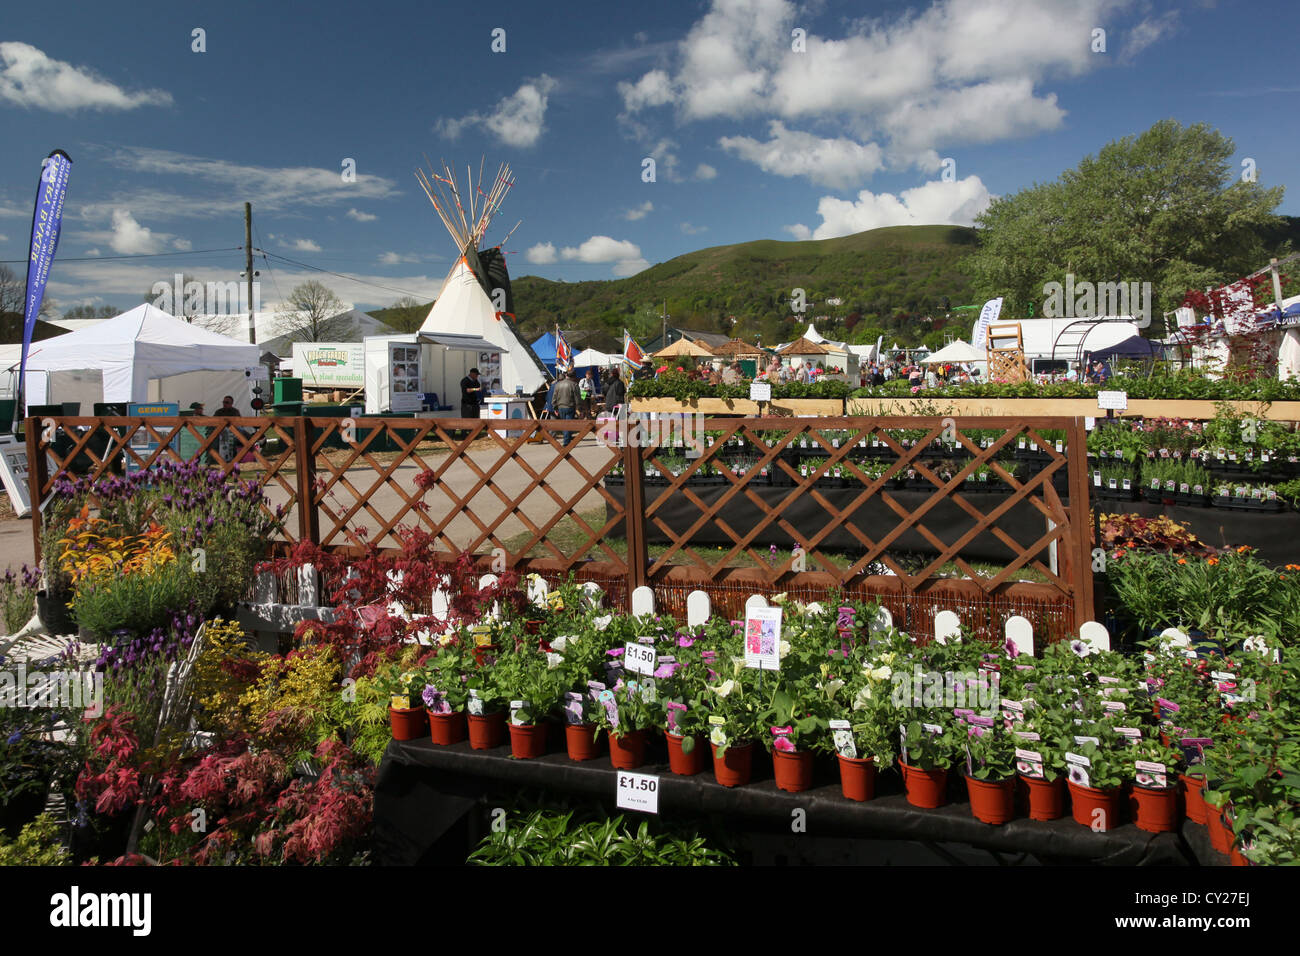 One of the many trade stands and plant stalls at the RHS Malvern Show, Worcestershire, England, UK Stock Photo